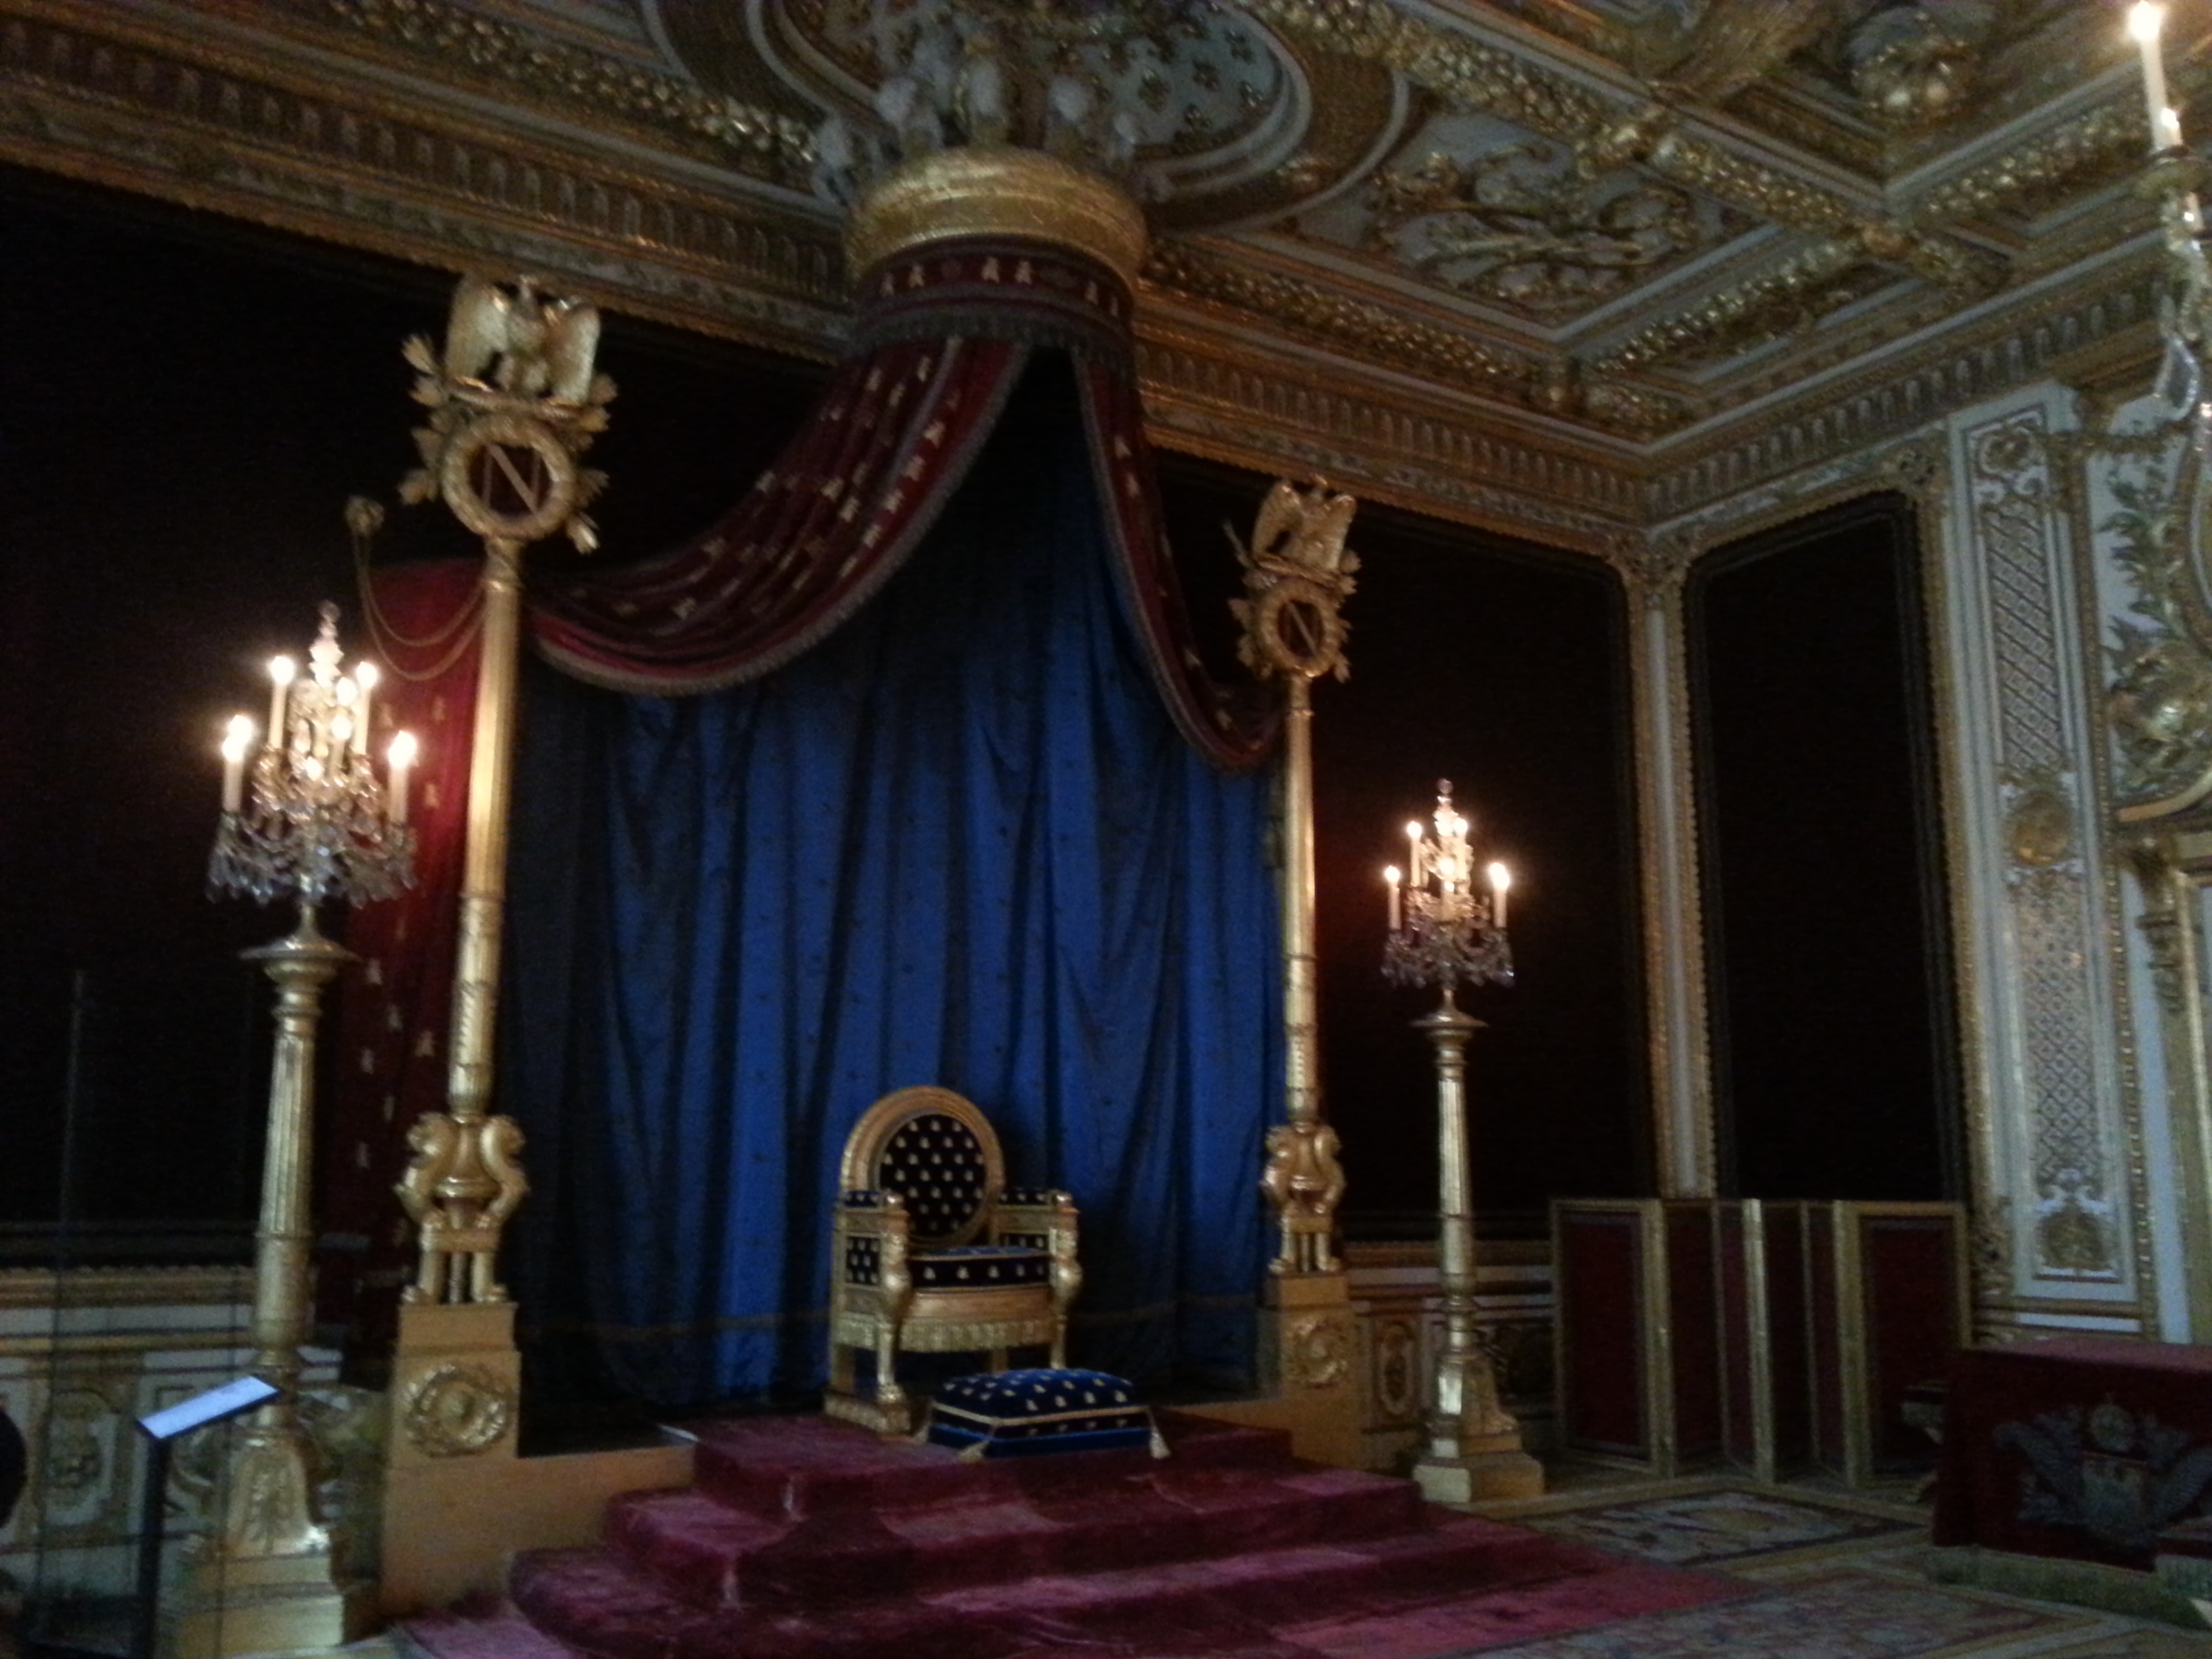 Throne Room, Palace of Fontainebleau, France